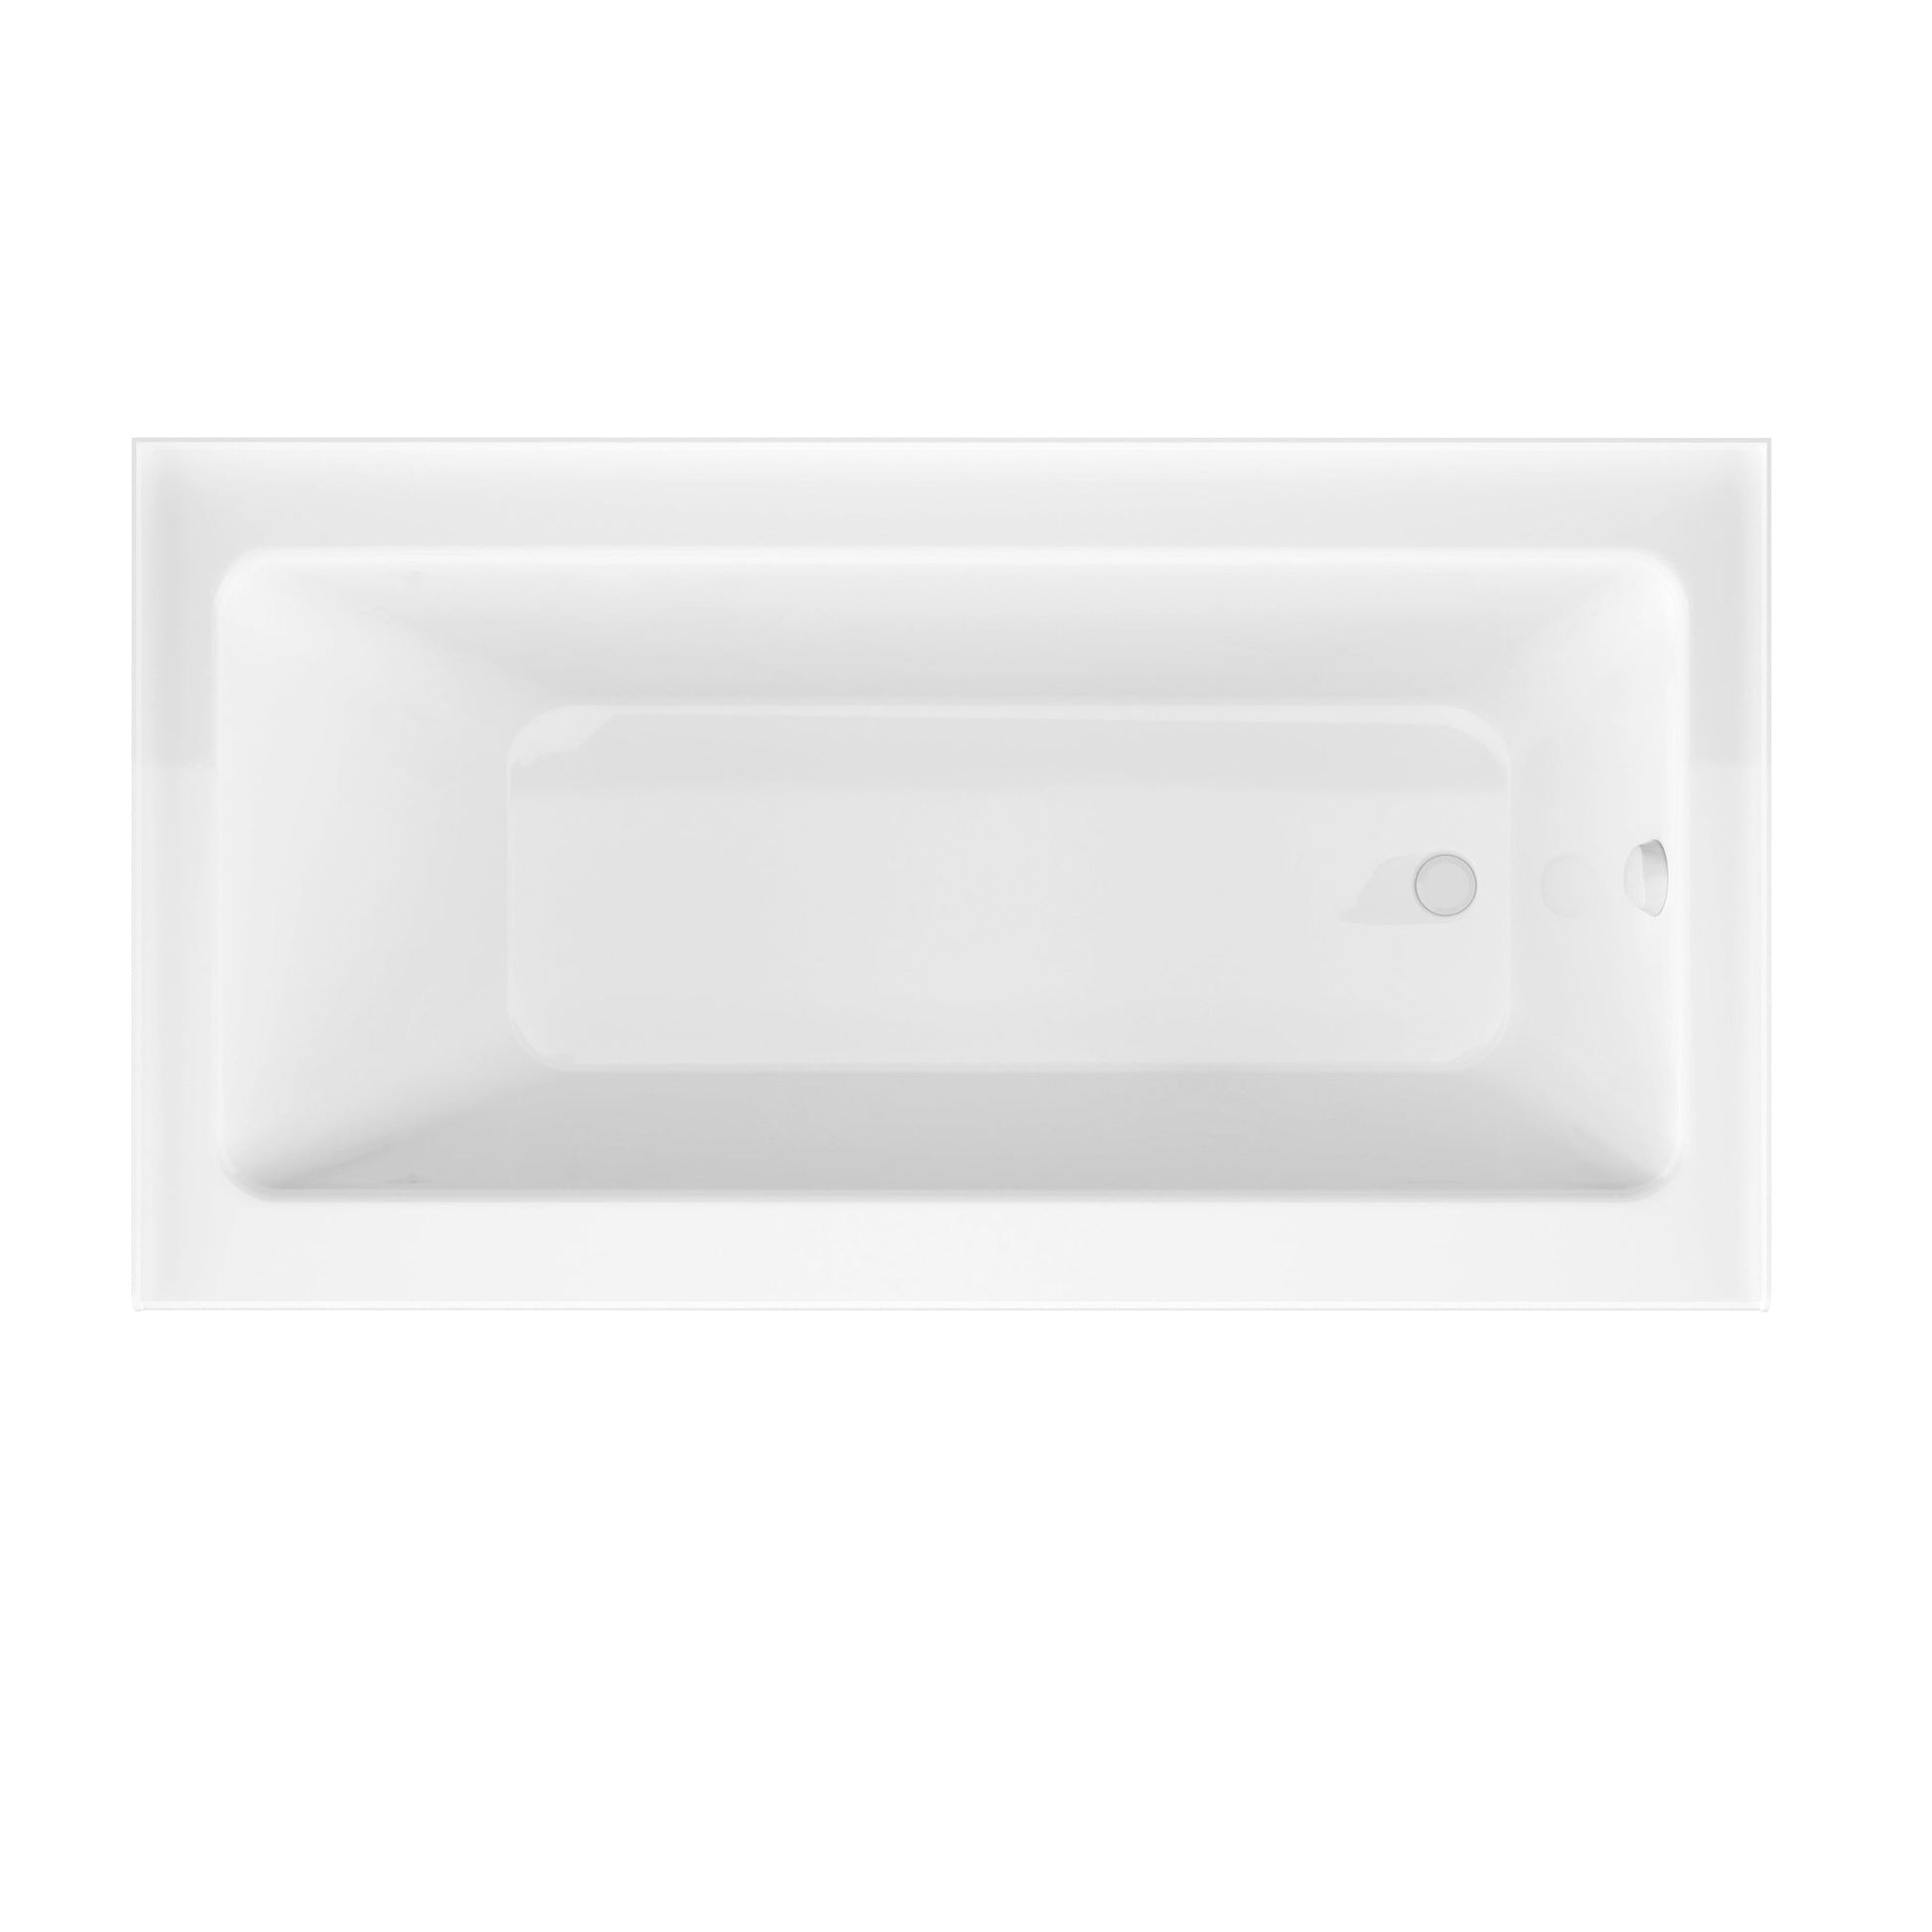 ANZZI Galleon Series White "60 x 32" Alcove Right Drain Rectangular Bathtub With Built-In Flange and Frameless Brushed Nickel Hinged Door